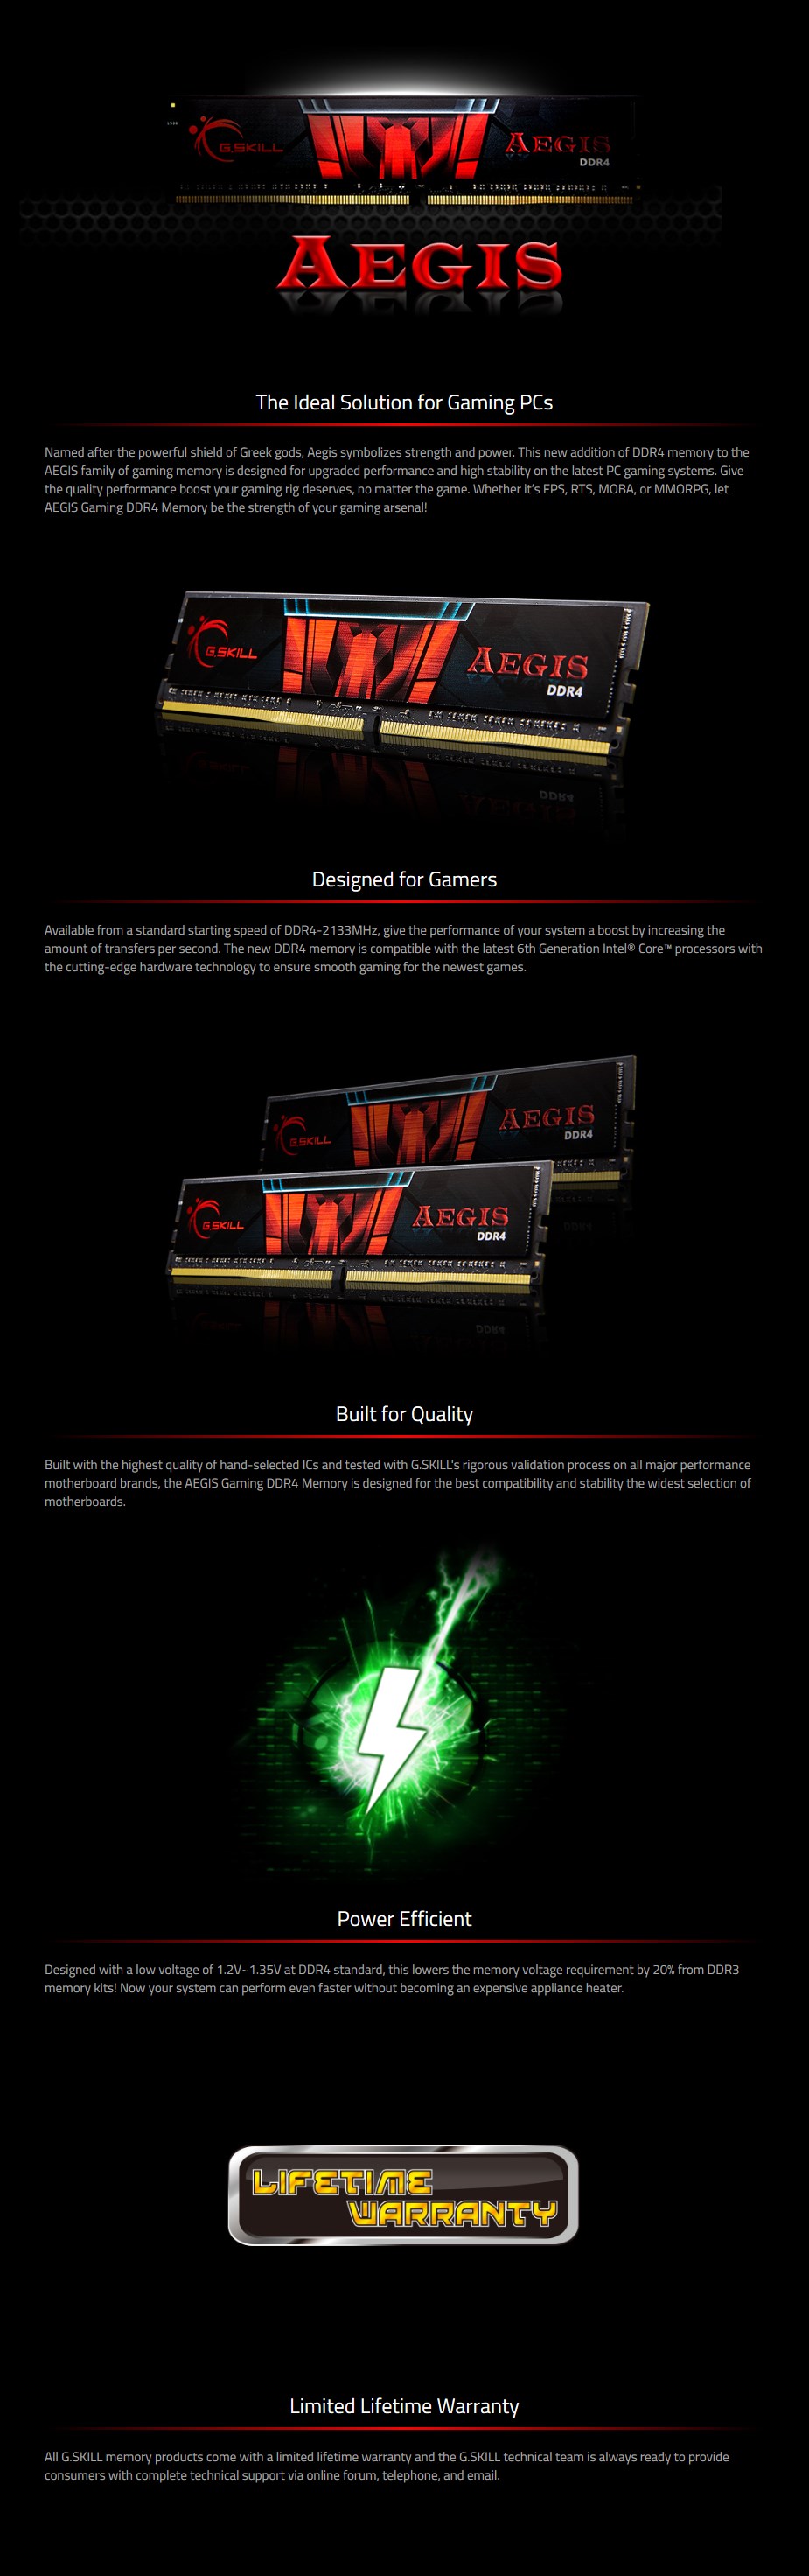 A large marketing image providing additional information about the product G.Skill 16GB Kit (1x16GB) DDR4 Aegis CL16 3200MHz - Black - Additional alt info not provided